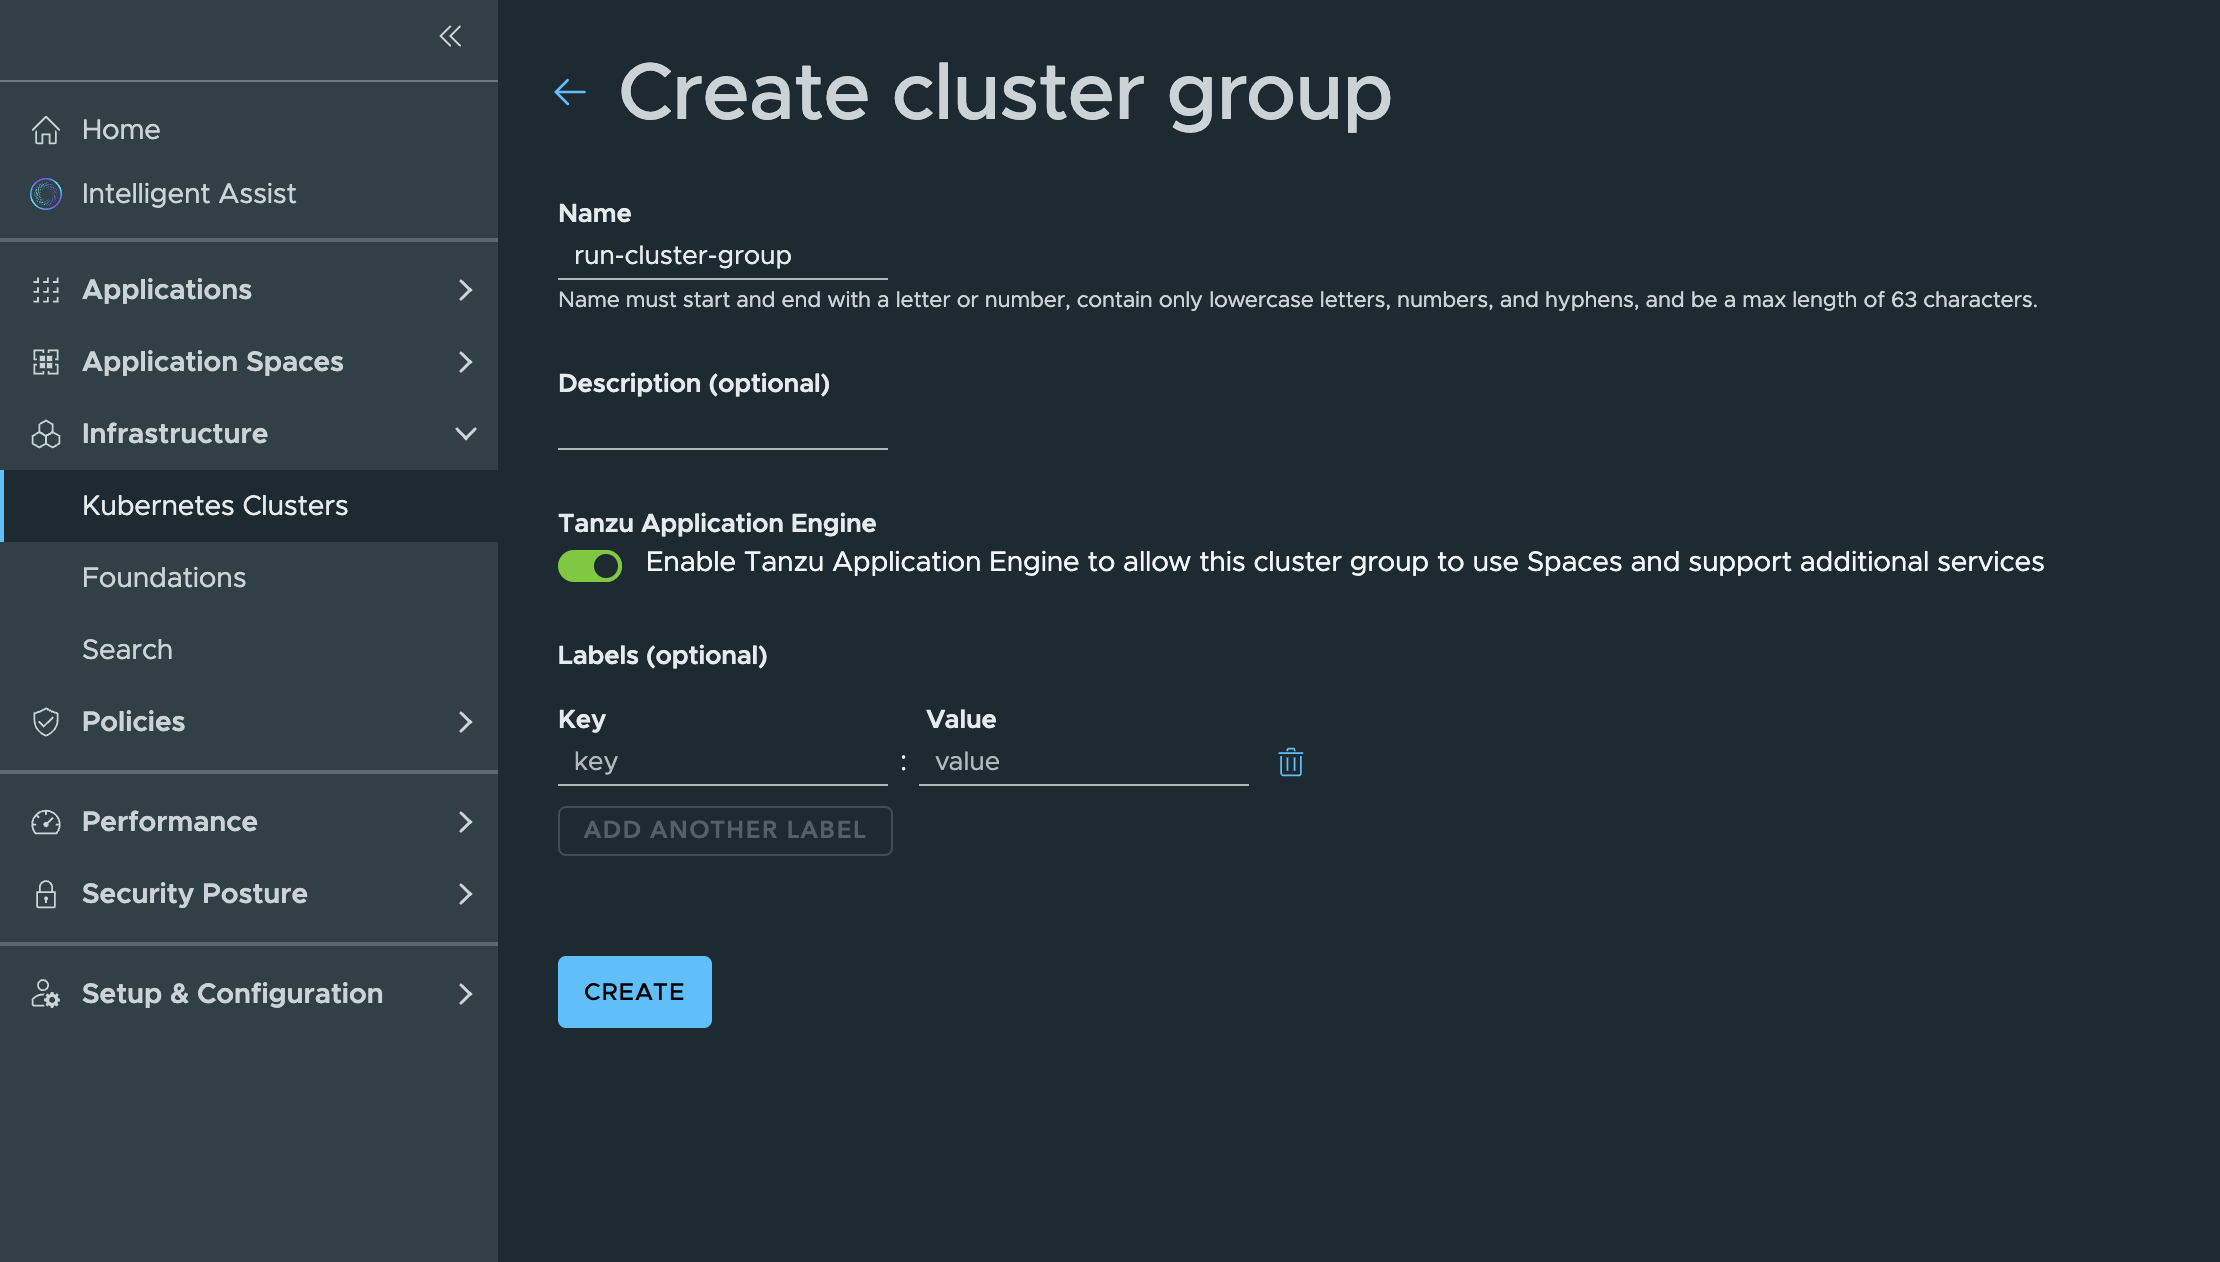 Create cluster group screen